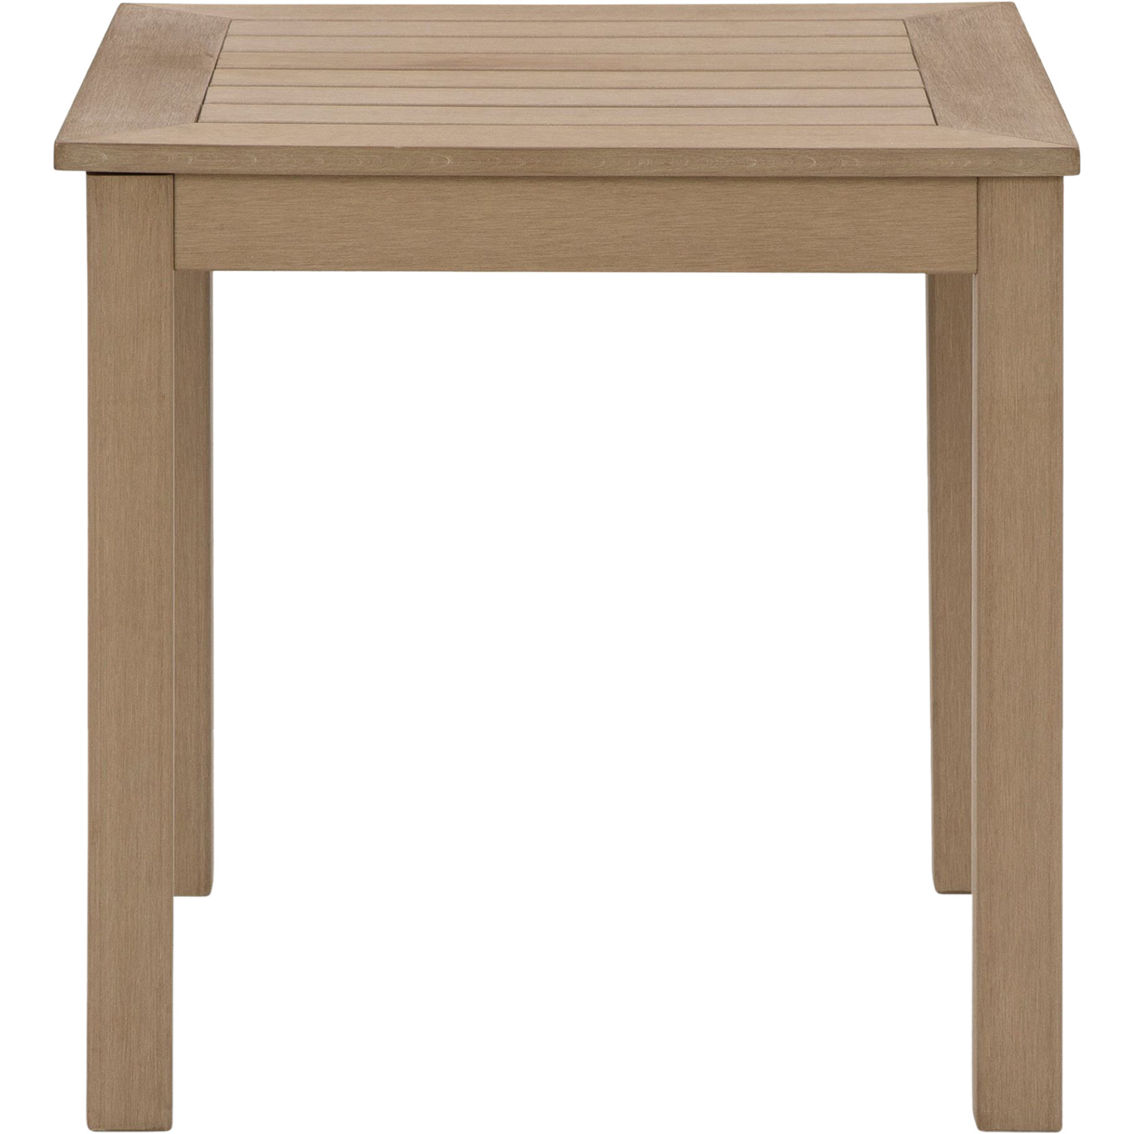 Signature Design by Ashley Hallow Creek Outdoor End Table - Image 2 of 5